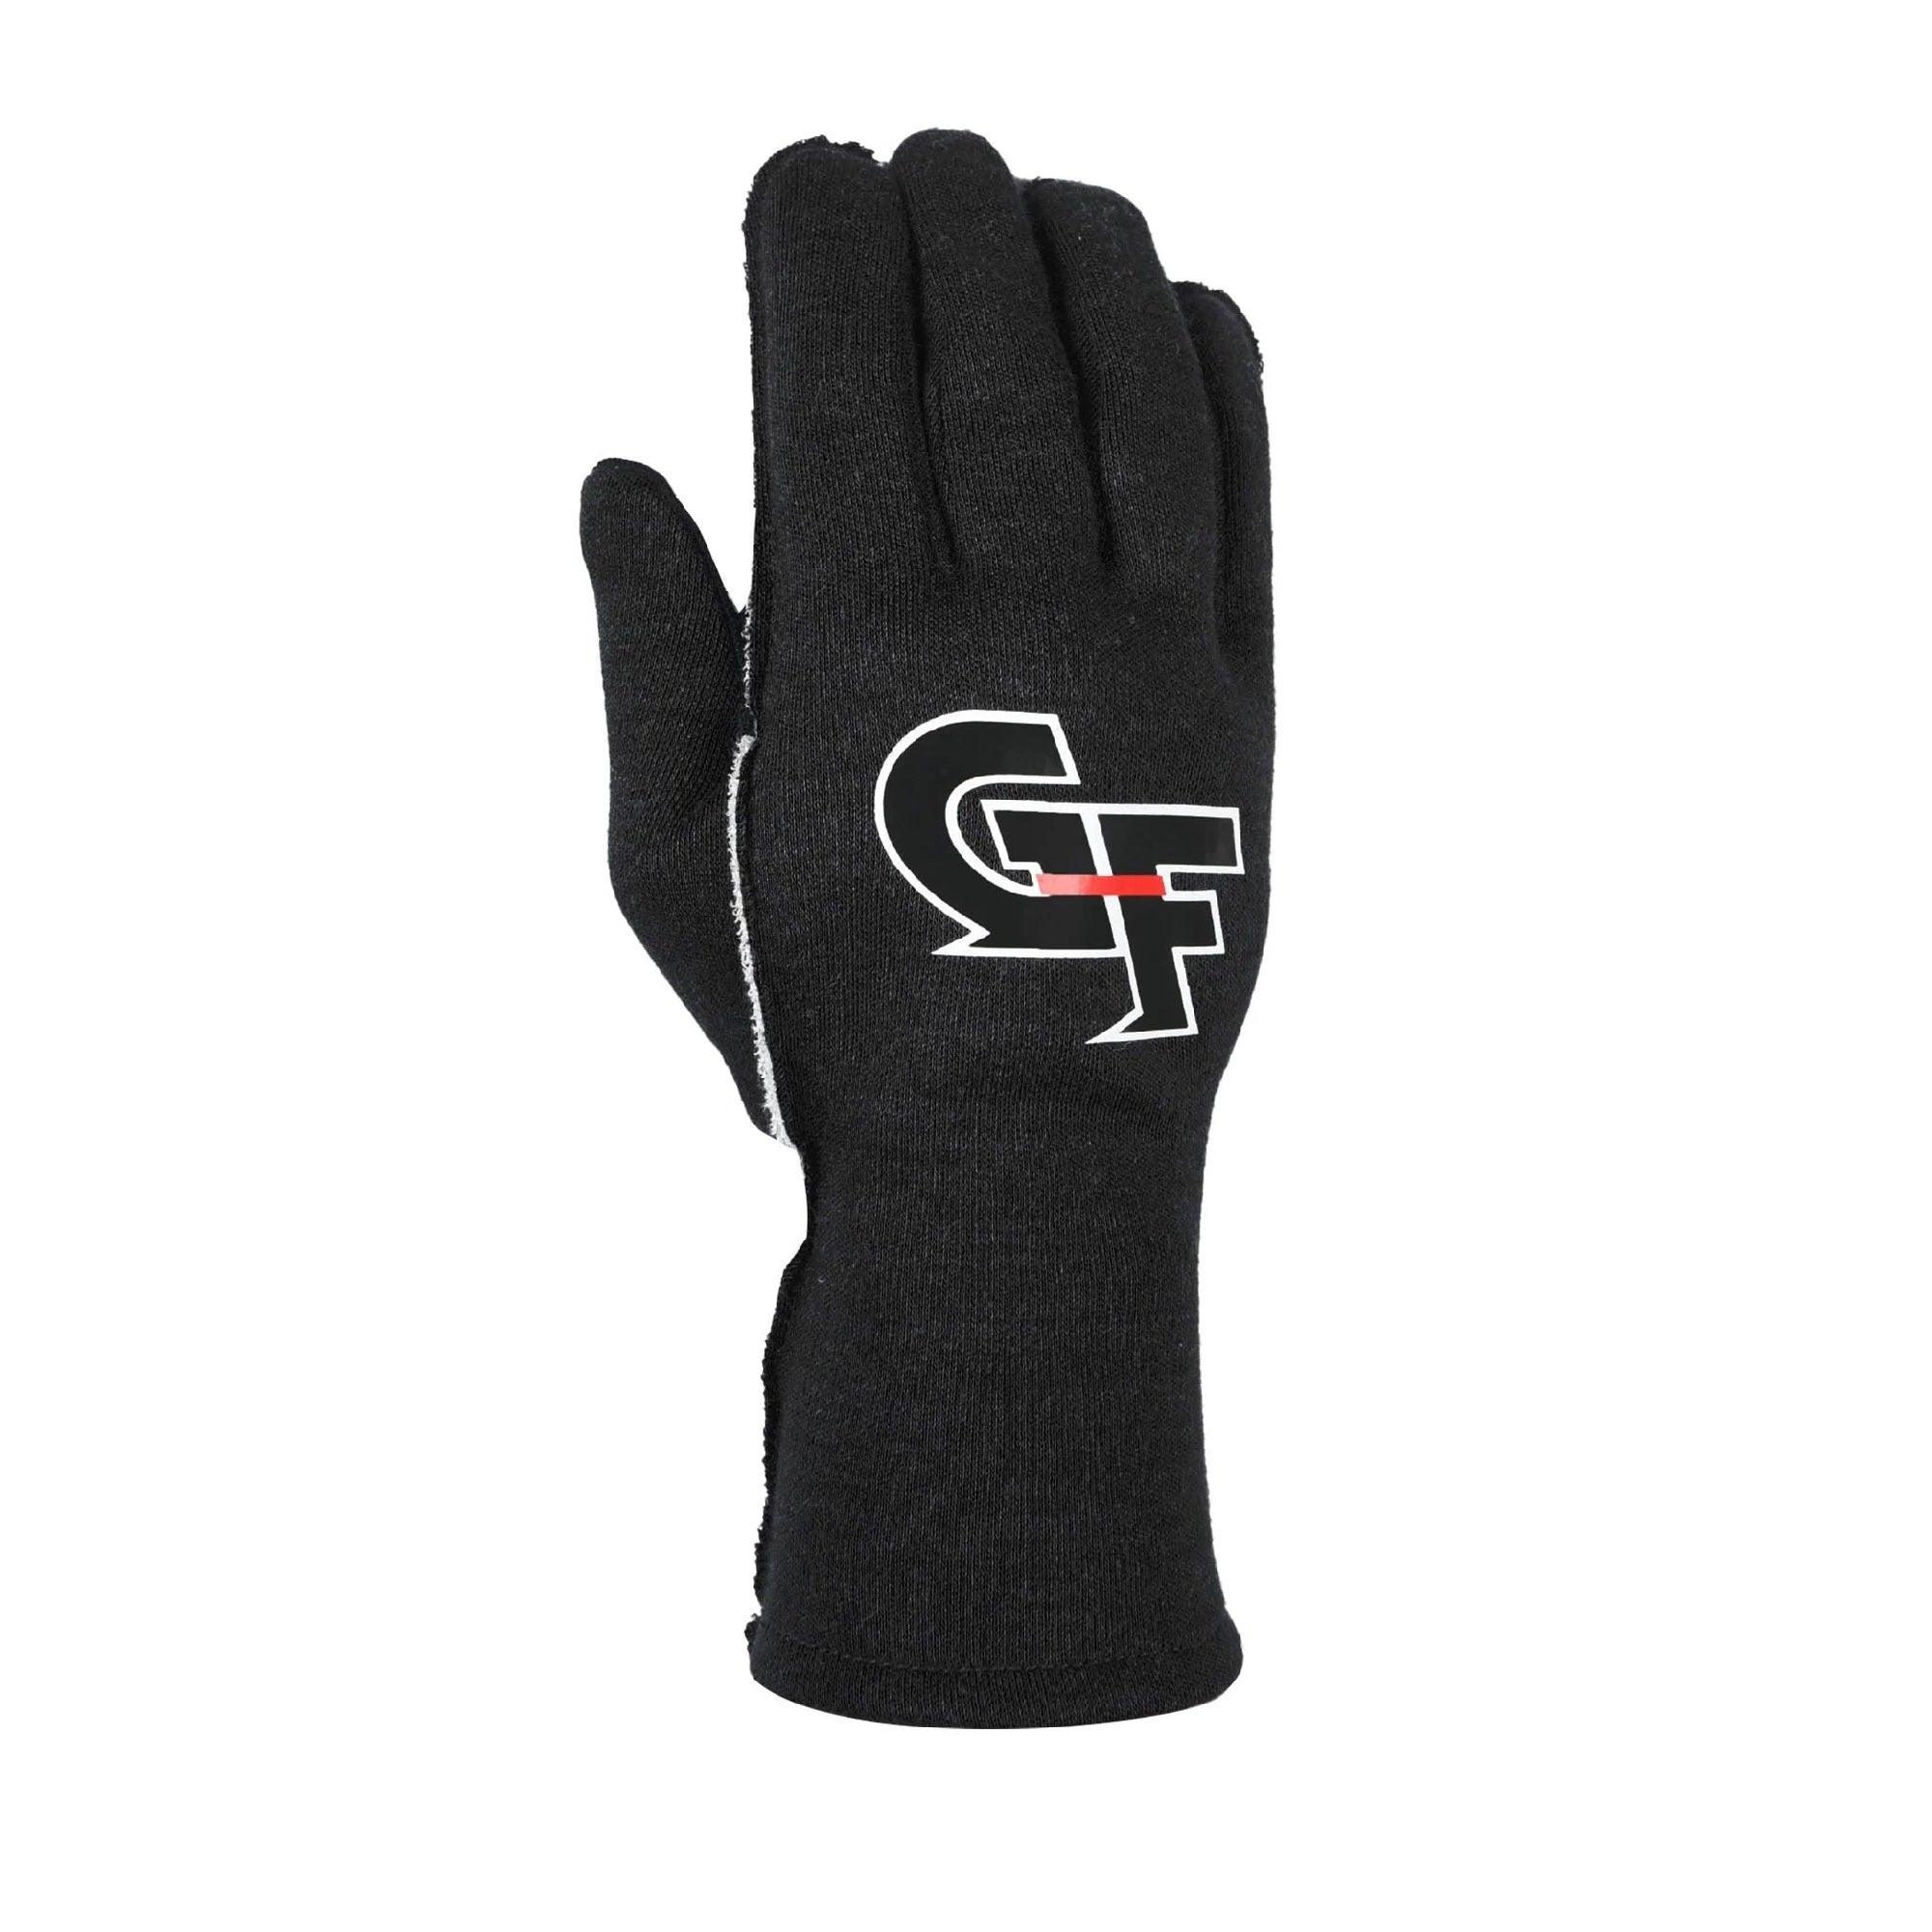 Gloves G-Limit XX-Small Black - Burlile Performance Products